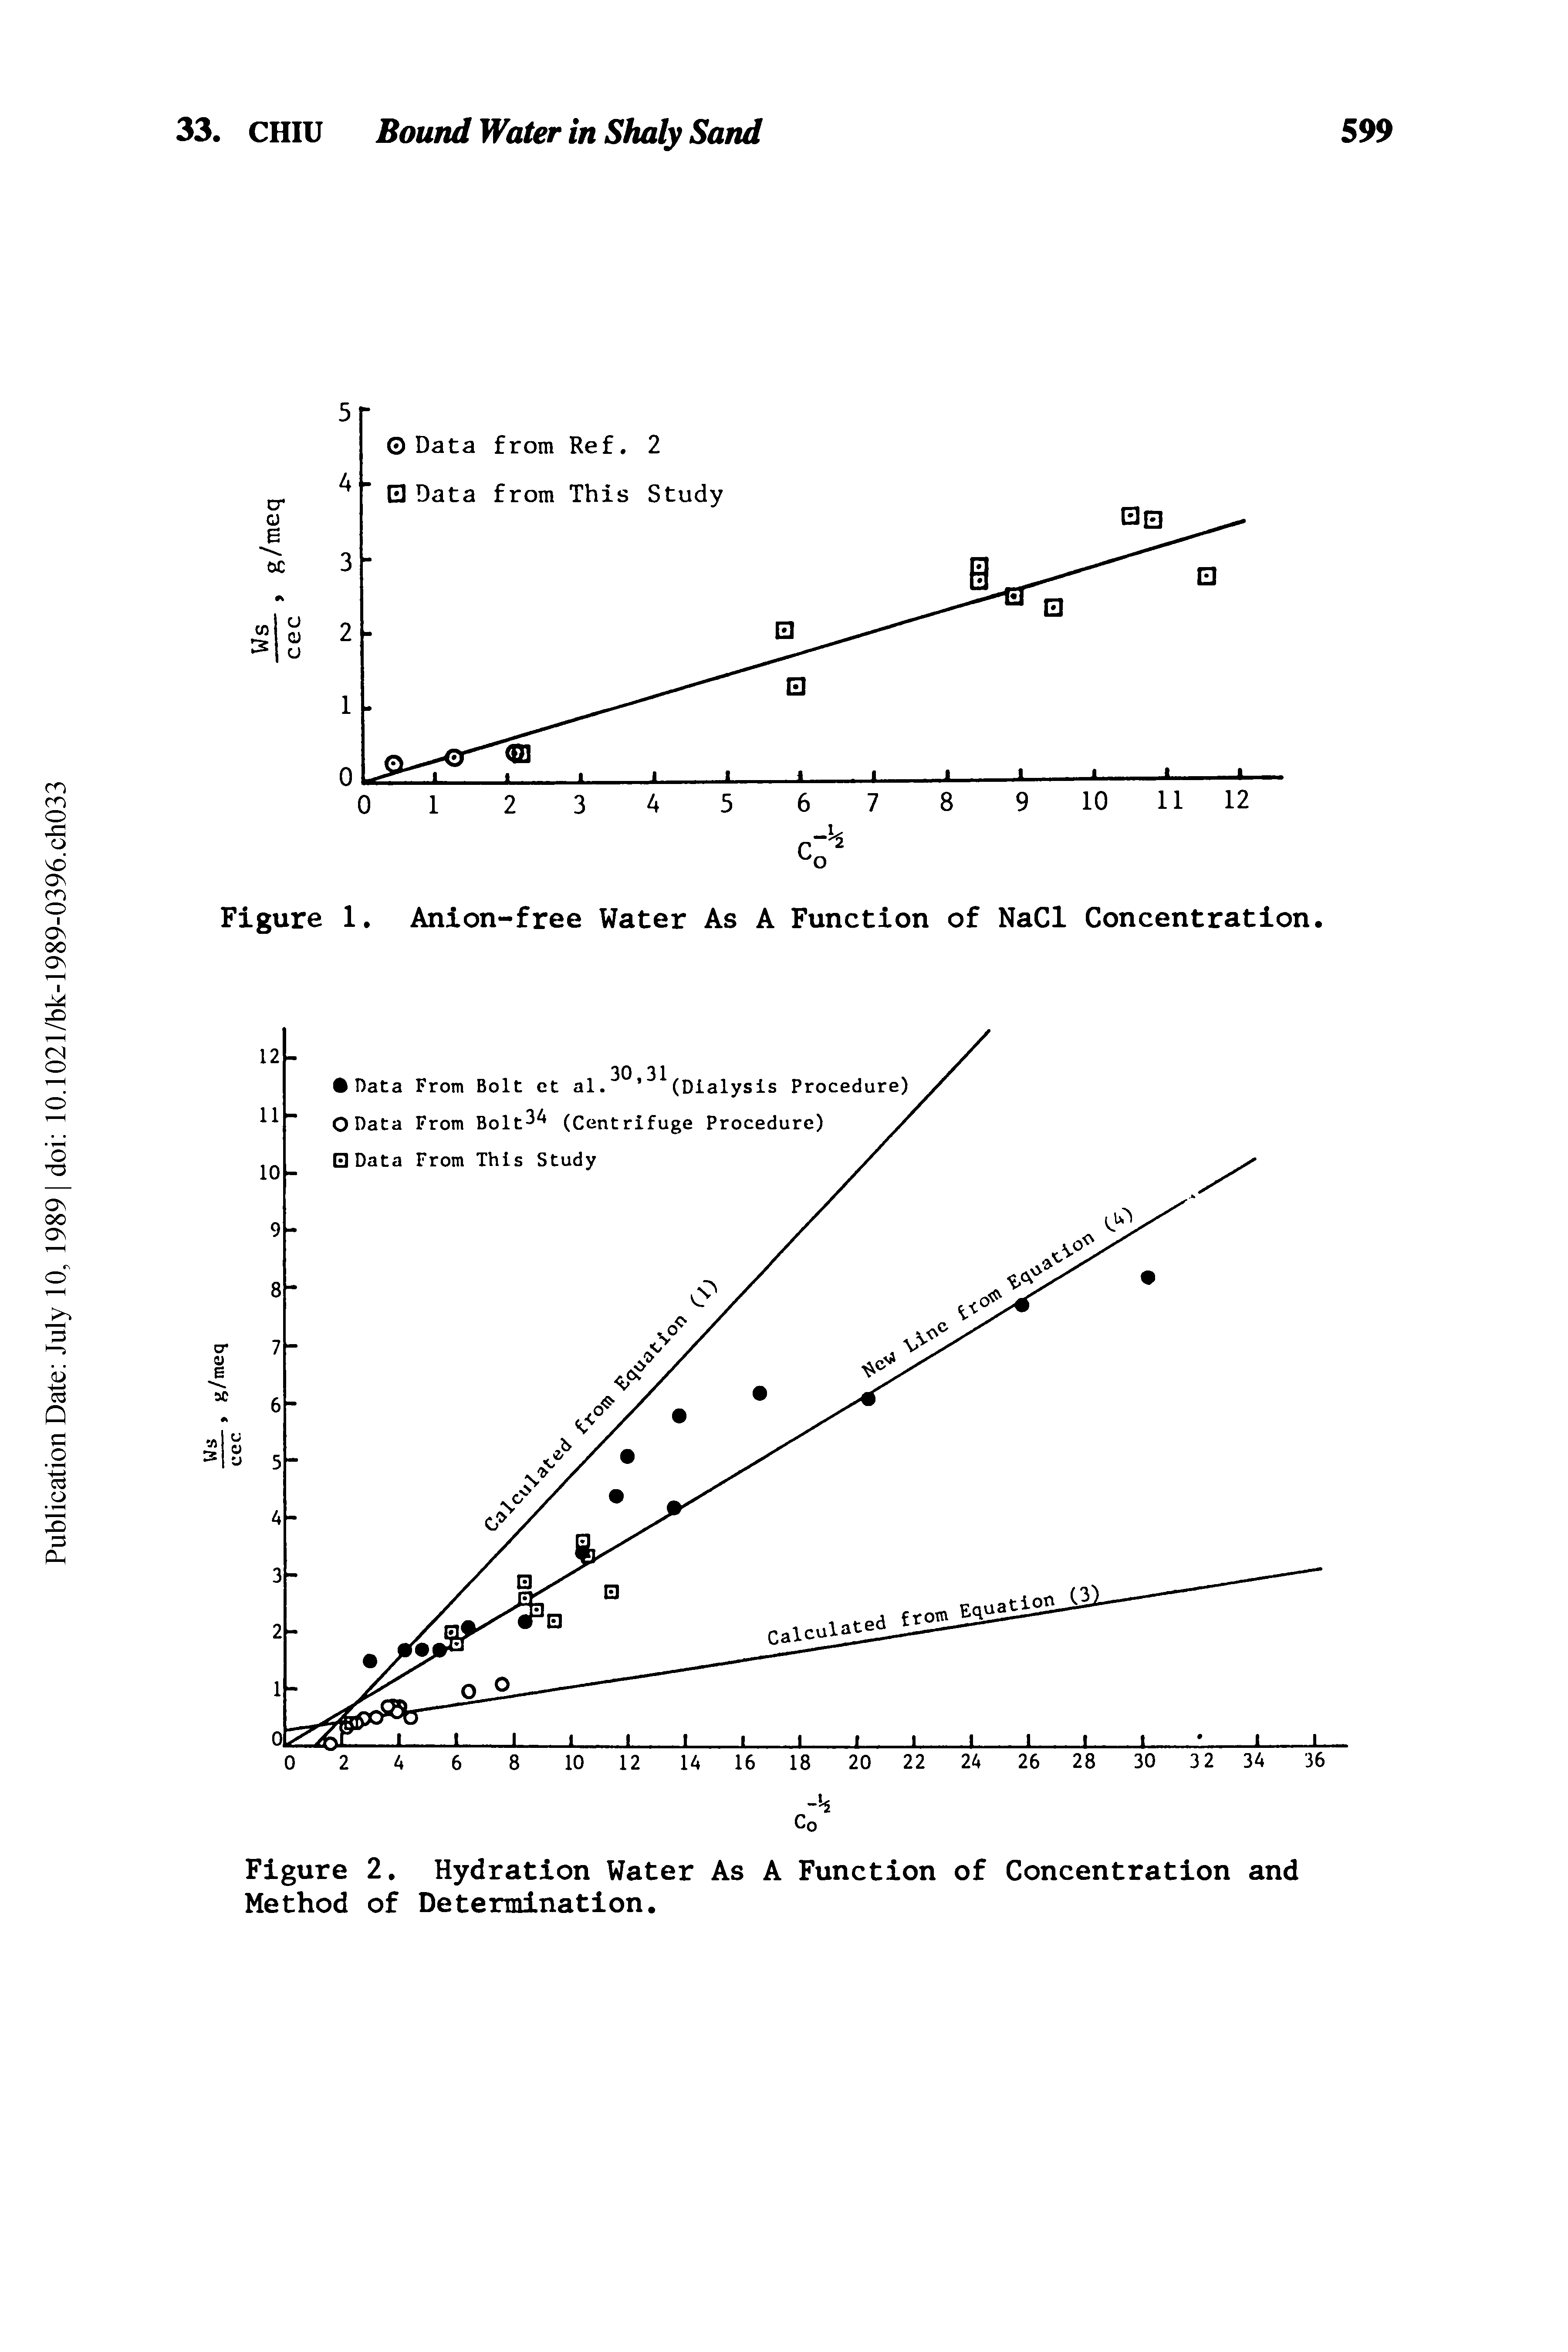 Figure 1. Anion-free Water As A Function of NaCl Concentration.